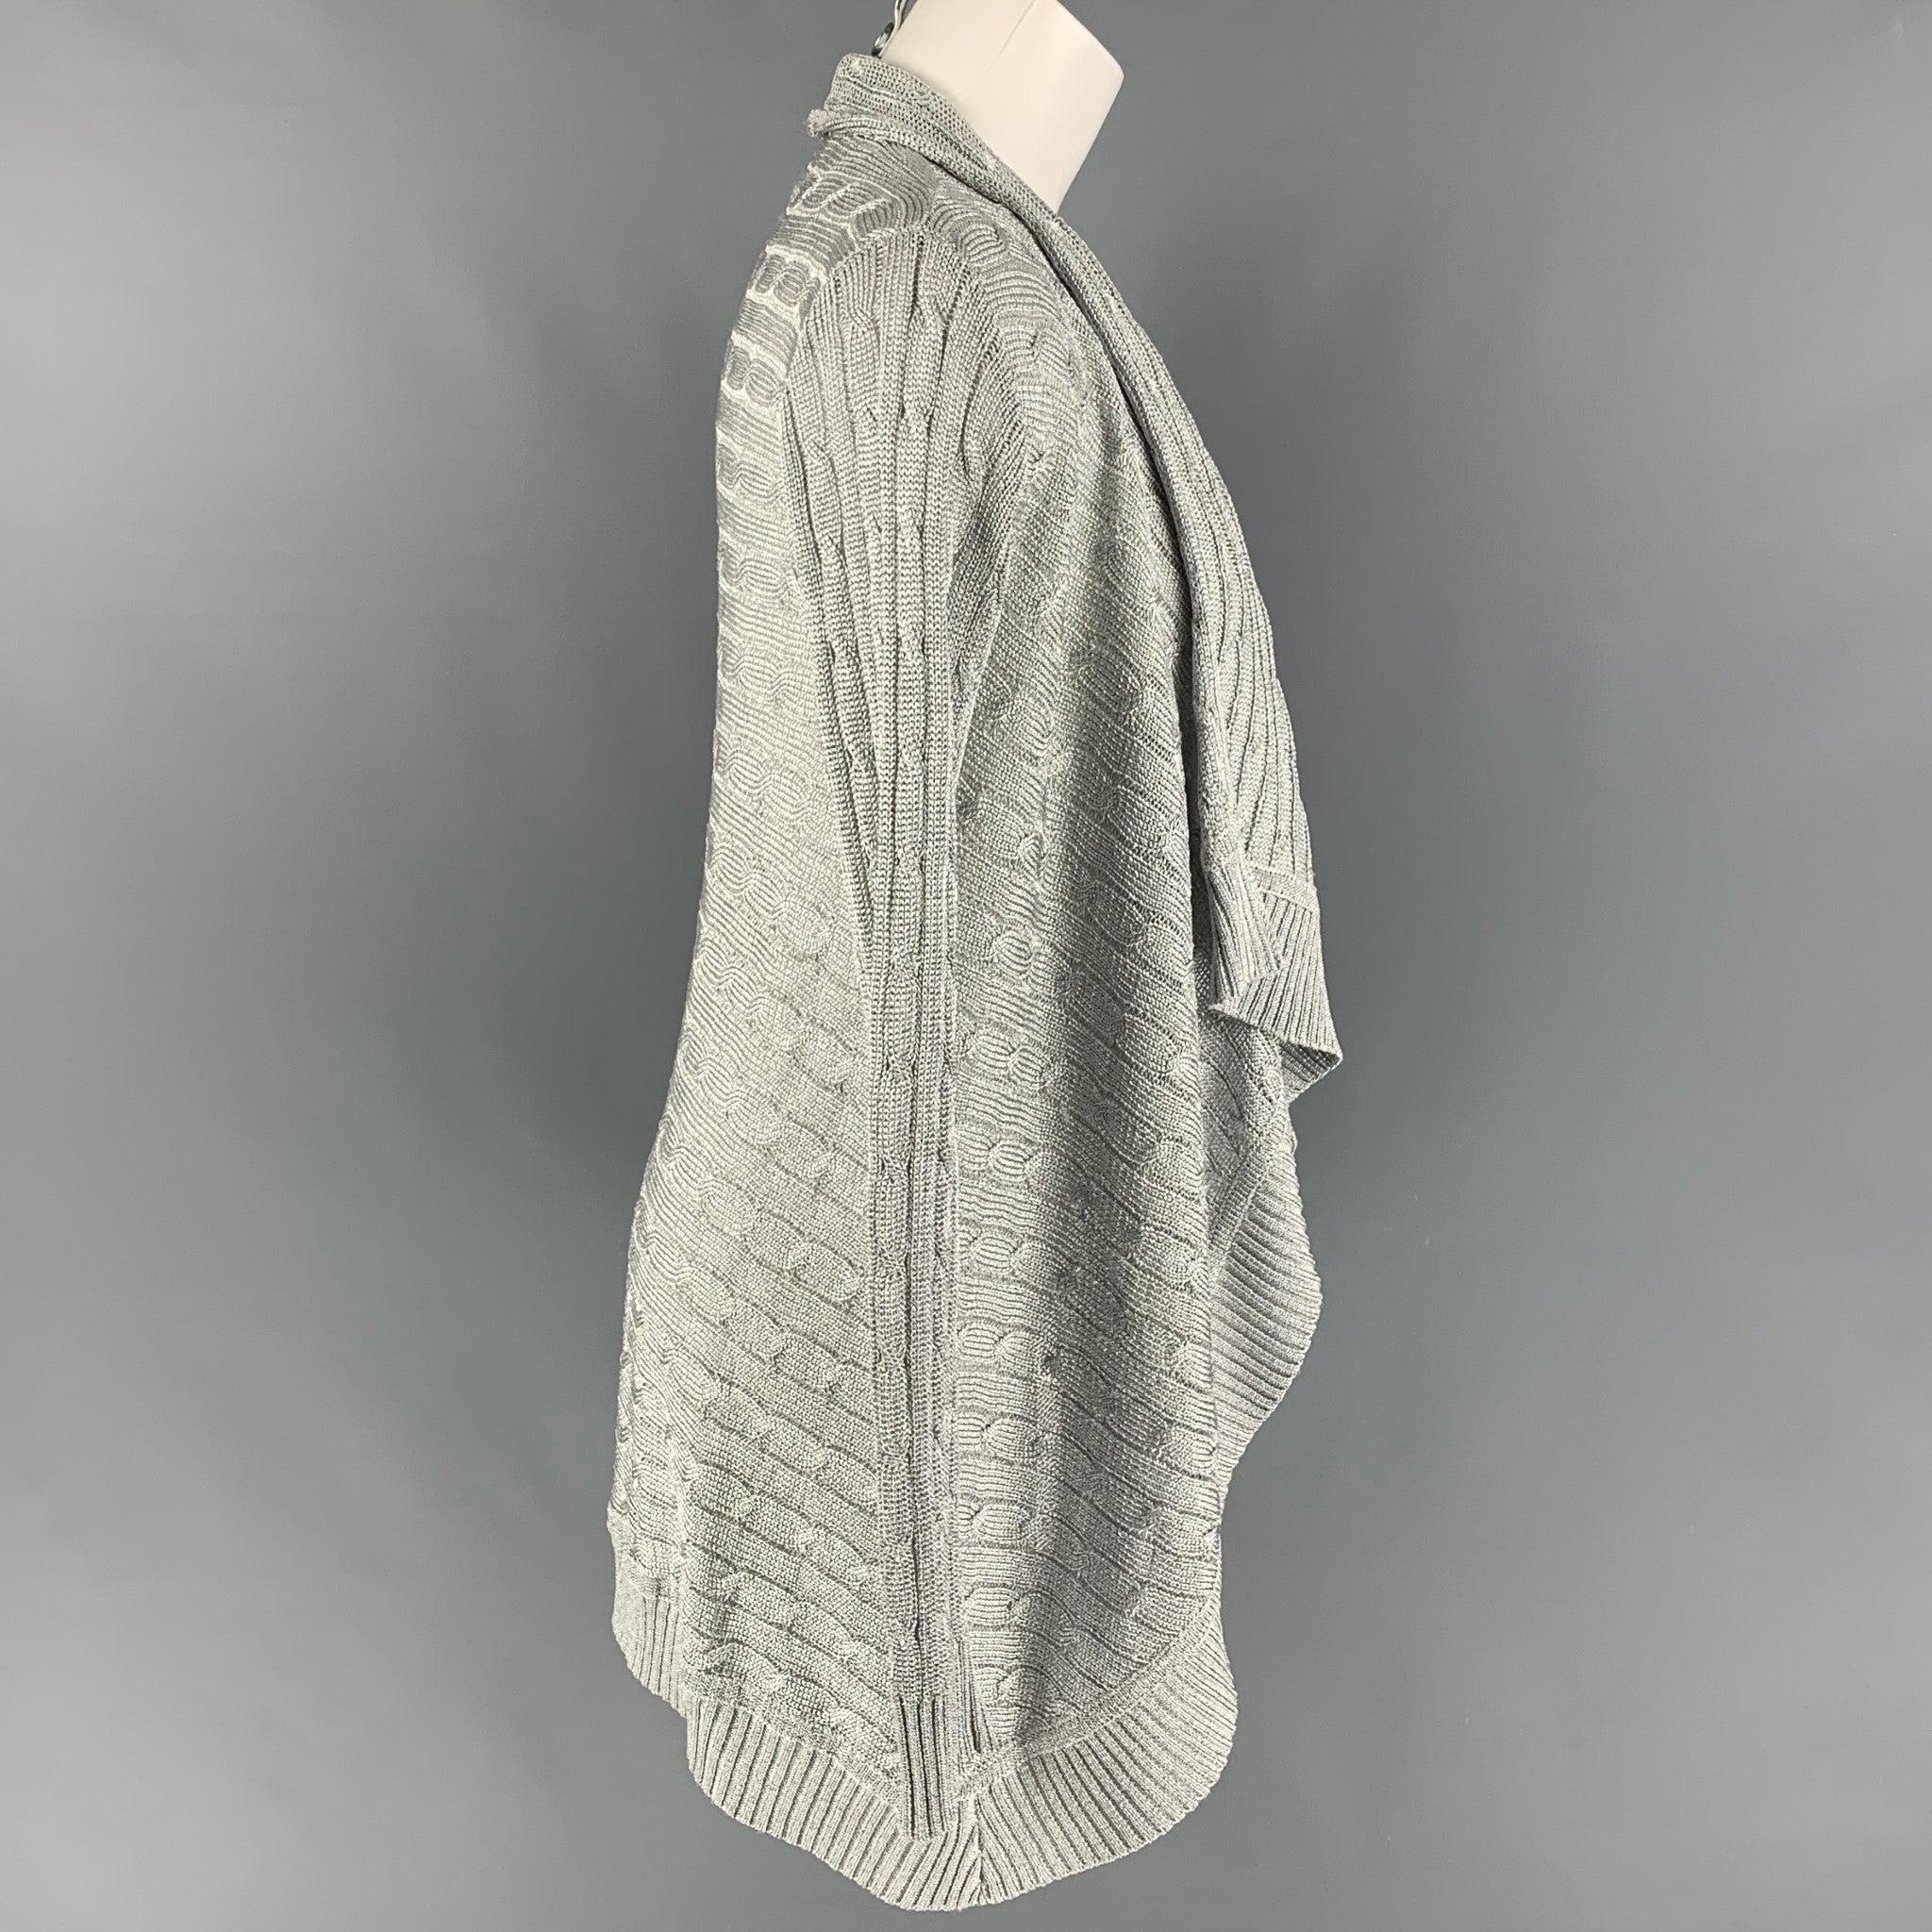 RALPH LAUREN 'Black Label' cardigan comes in a silver metallic cotton blend featuring a shawl collar and a open front.
Very Good
Pre-Owned Condition. 

Marked:   S 

Measurements: 
 
Shoulder: 14 inches  Bust: 36 inches  Sleeve:
29 inches Length: 30